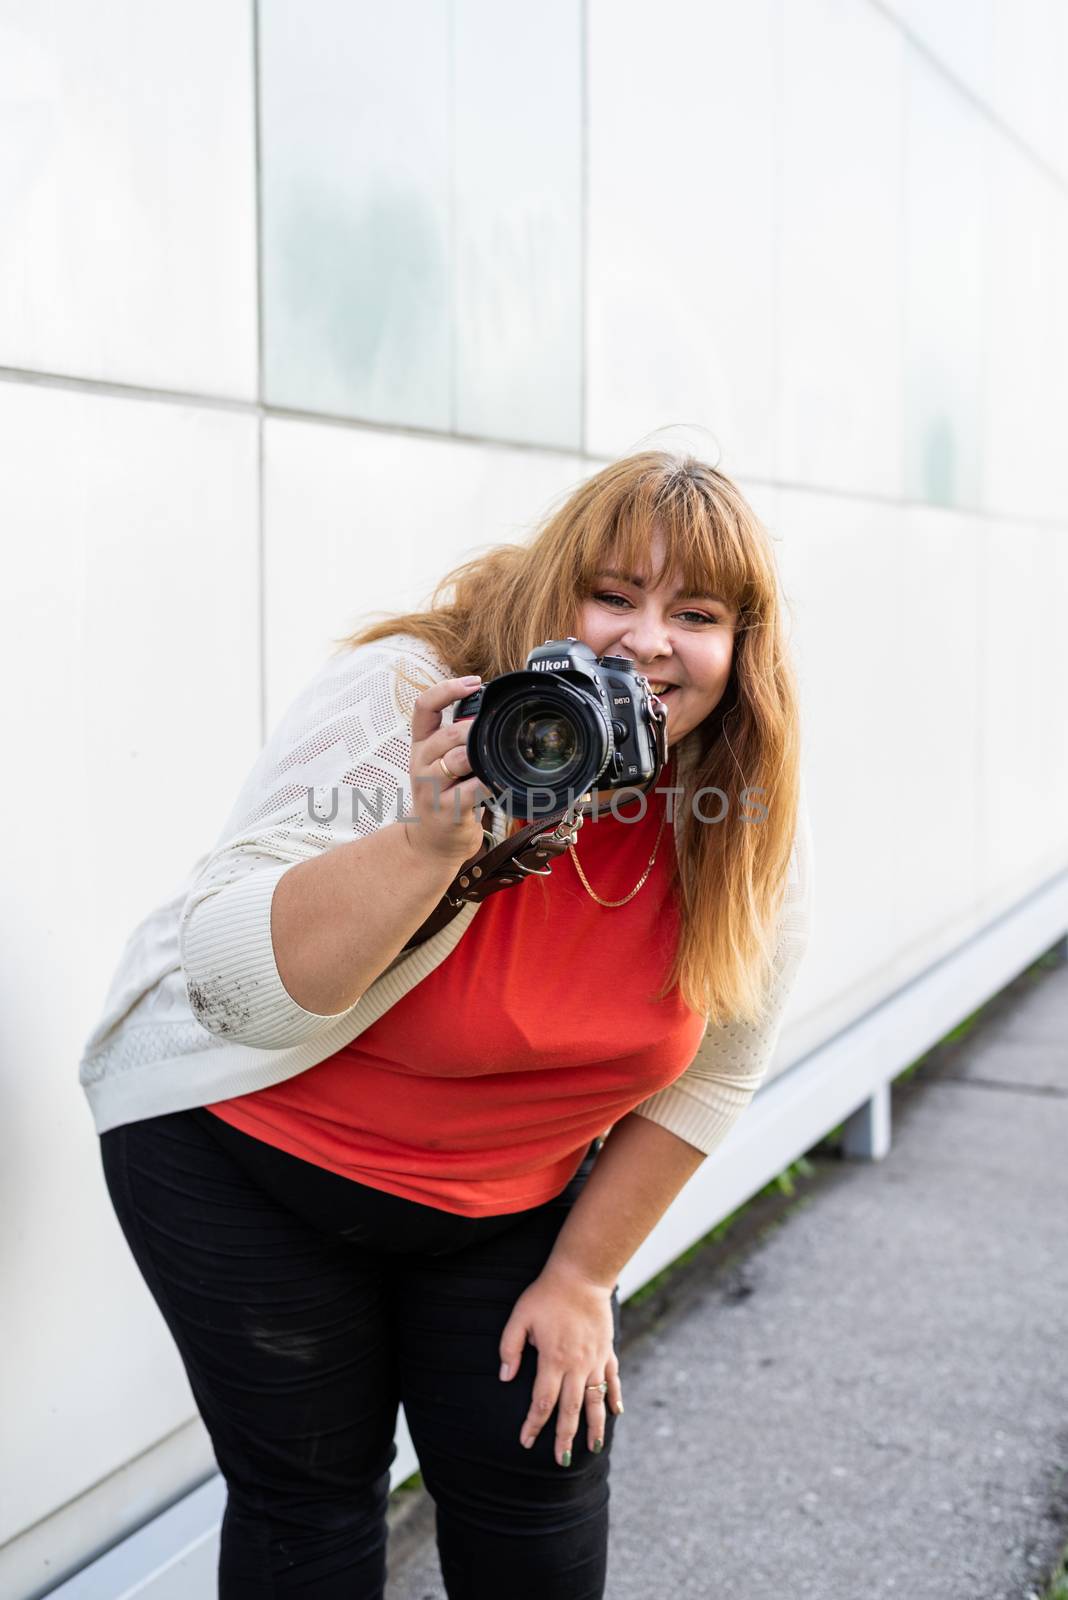 Body positive. Portrait of overweight woman taking pictures with a camera outdoors